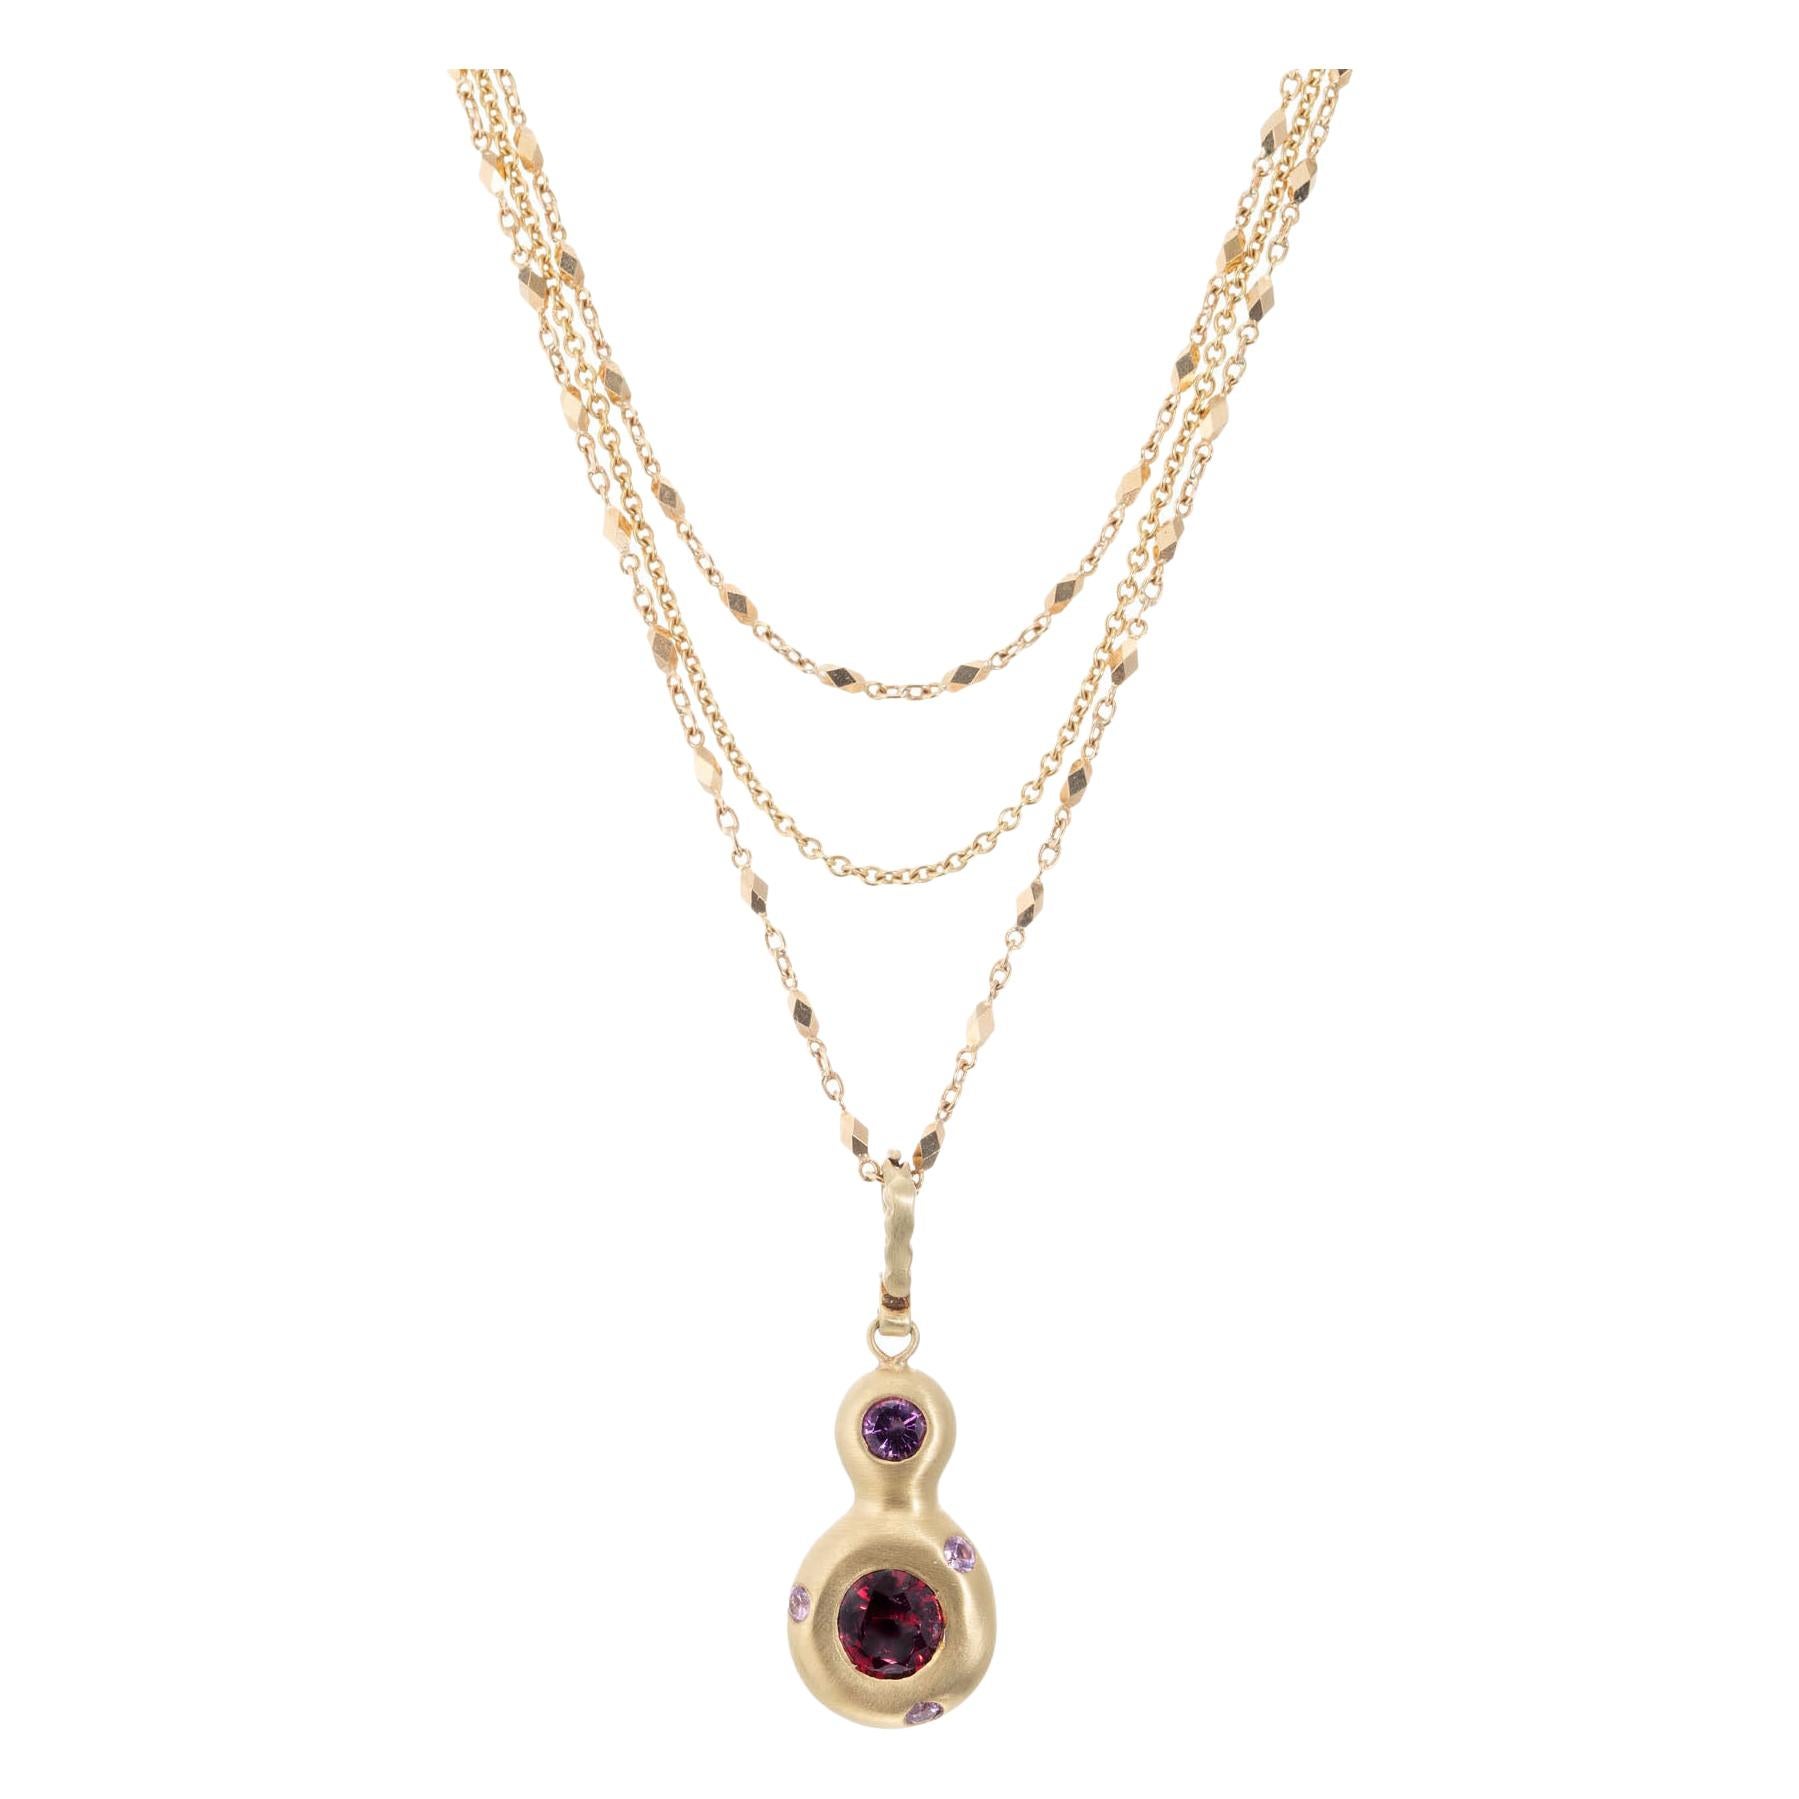 Robin Rotenier GIA Certified 1.32 Carat Spinel Sapphire Gold Pendant Necklace